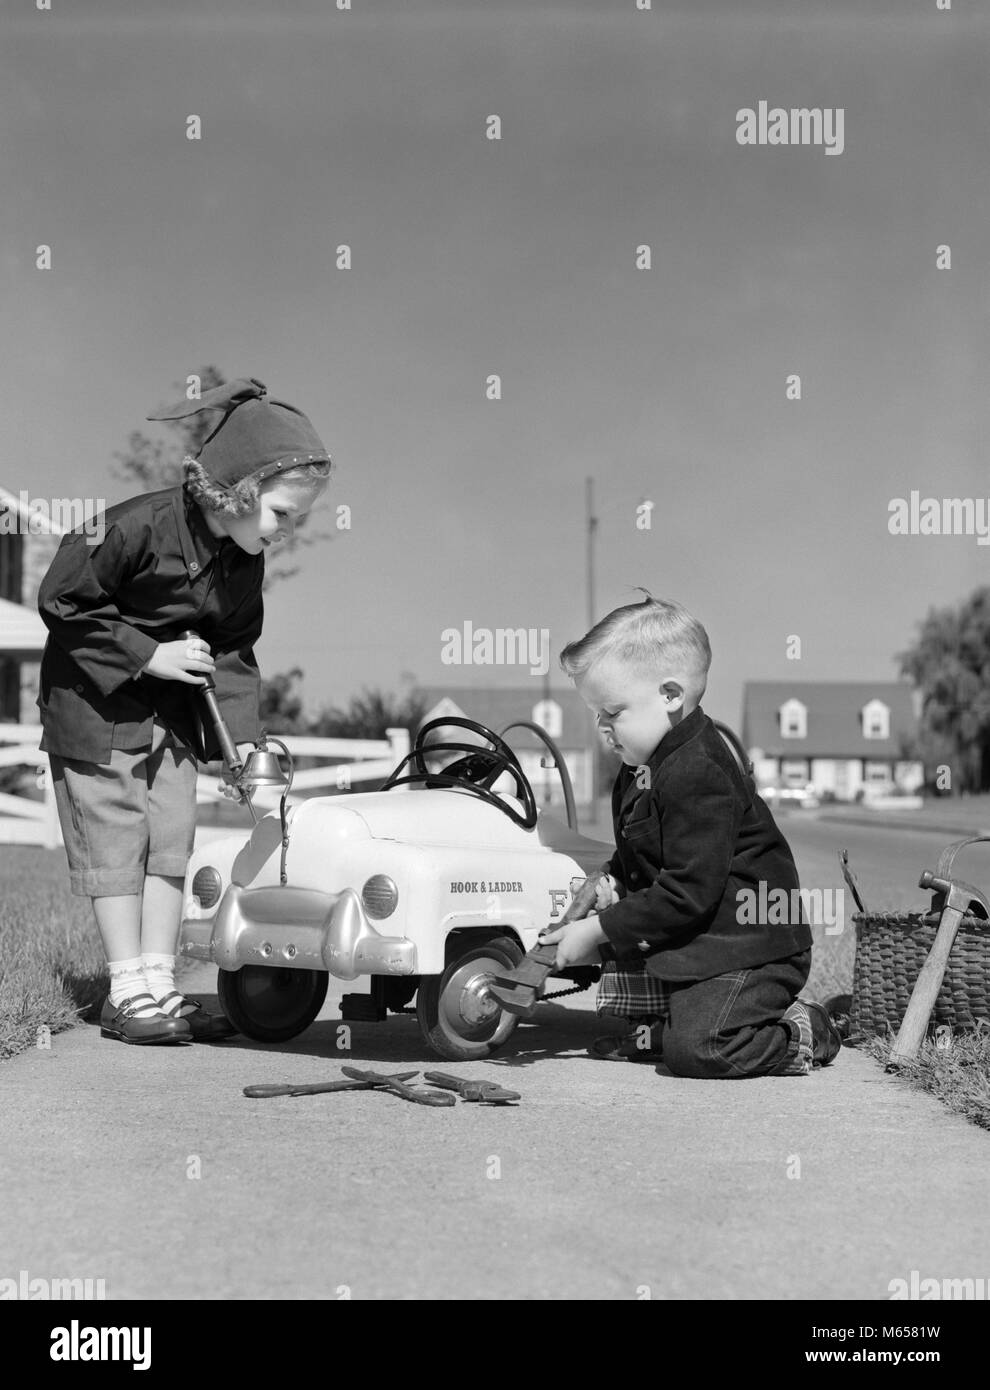 1930s TWO CHILDREN BOY AND A GIRL WORKING FIXING SERVICING A TOY PEDDLE CAR AUTOMOBILE - j5811 HAR001 HARS LIFESTYLE FEMALES BROTHERS HOME LIFE COPY SPACE PEOPLE CHILDREN FRIENDSHIP FULL-LENGTH INSPIRATION AUTOMOBILE SIBLINGS CONFIDENCE FIXING SISTERS TRANSPORTATION NOSTALGIA TOGETHERNESS GOALS SUCCESS 5-6 YEARS HAPPINESS CUSTOMER SERVICE AUTOS KNOWLEDGE PROGRESS RECREATION LABOR PRIDE EMPLOYMENT SIBLING REPAIRING CONNECTION COOPERATION AUTOMOBILES VEHICLES EMPLOYEE JUVENILES MALES SERVICING B&W BLACK AND WHITE CAUCASIAN ETHNICITY CONCENTRATION LABORING OCCUPATIONS OLD FASHIONED PEDDLE CAR Stock Photo